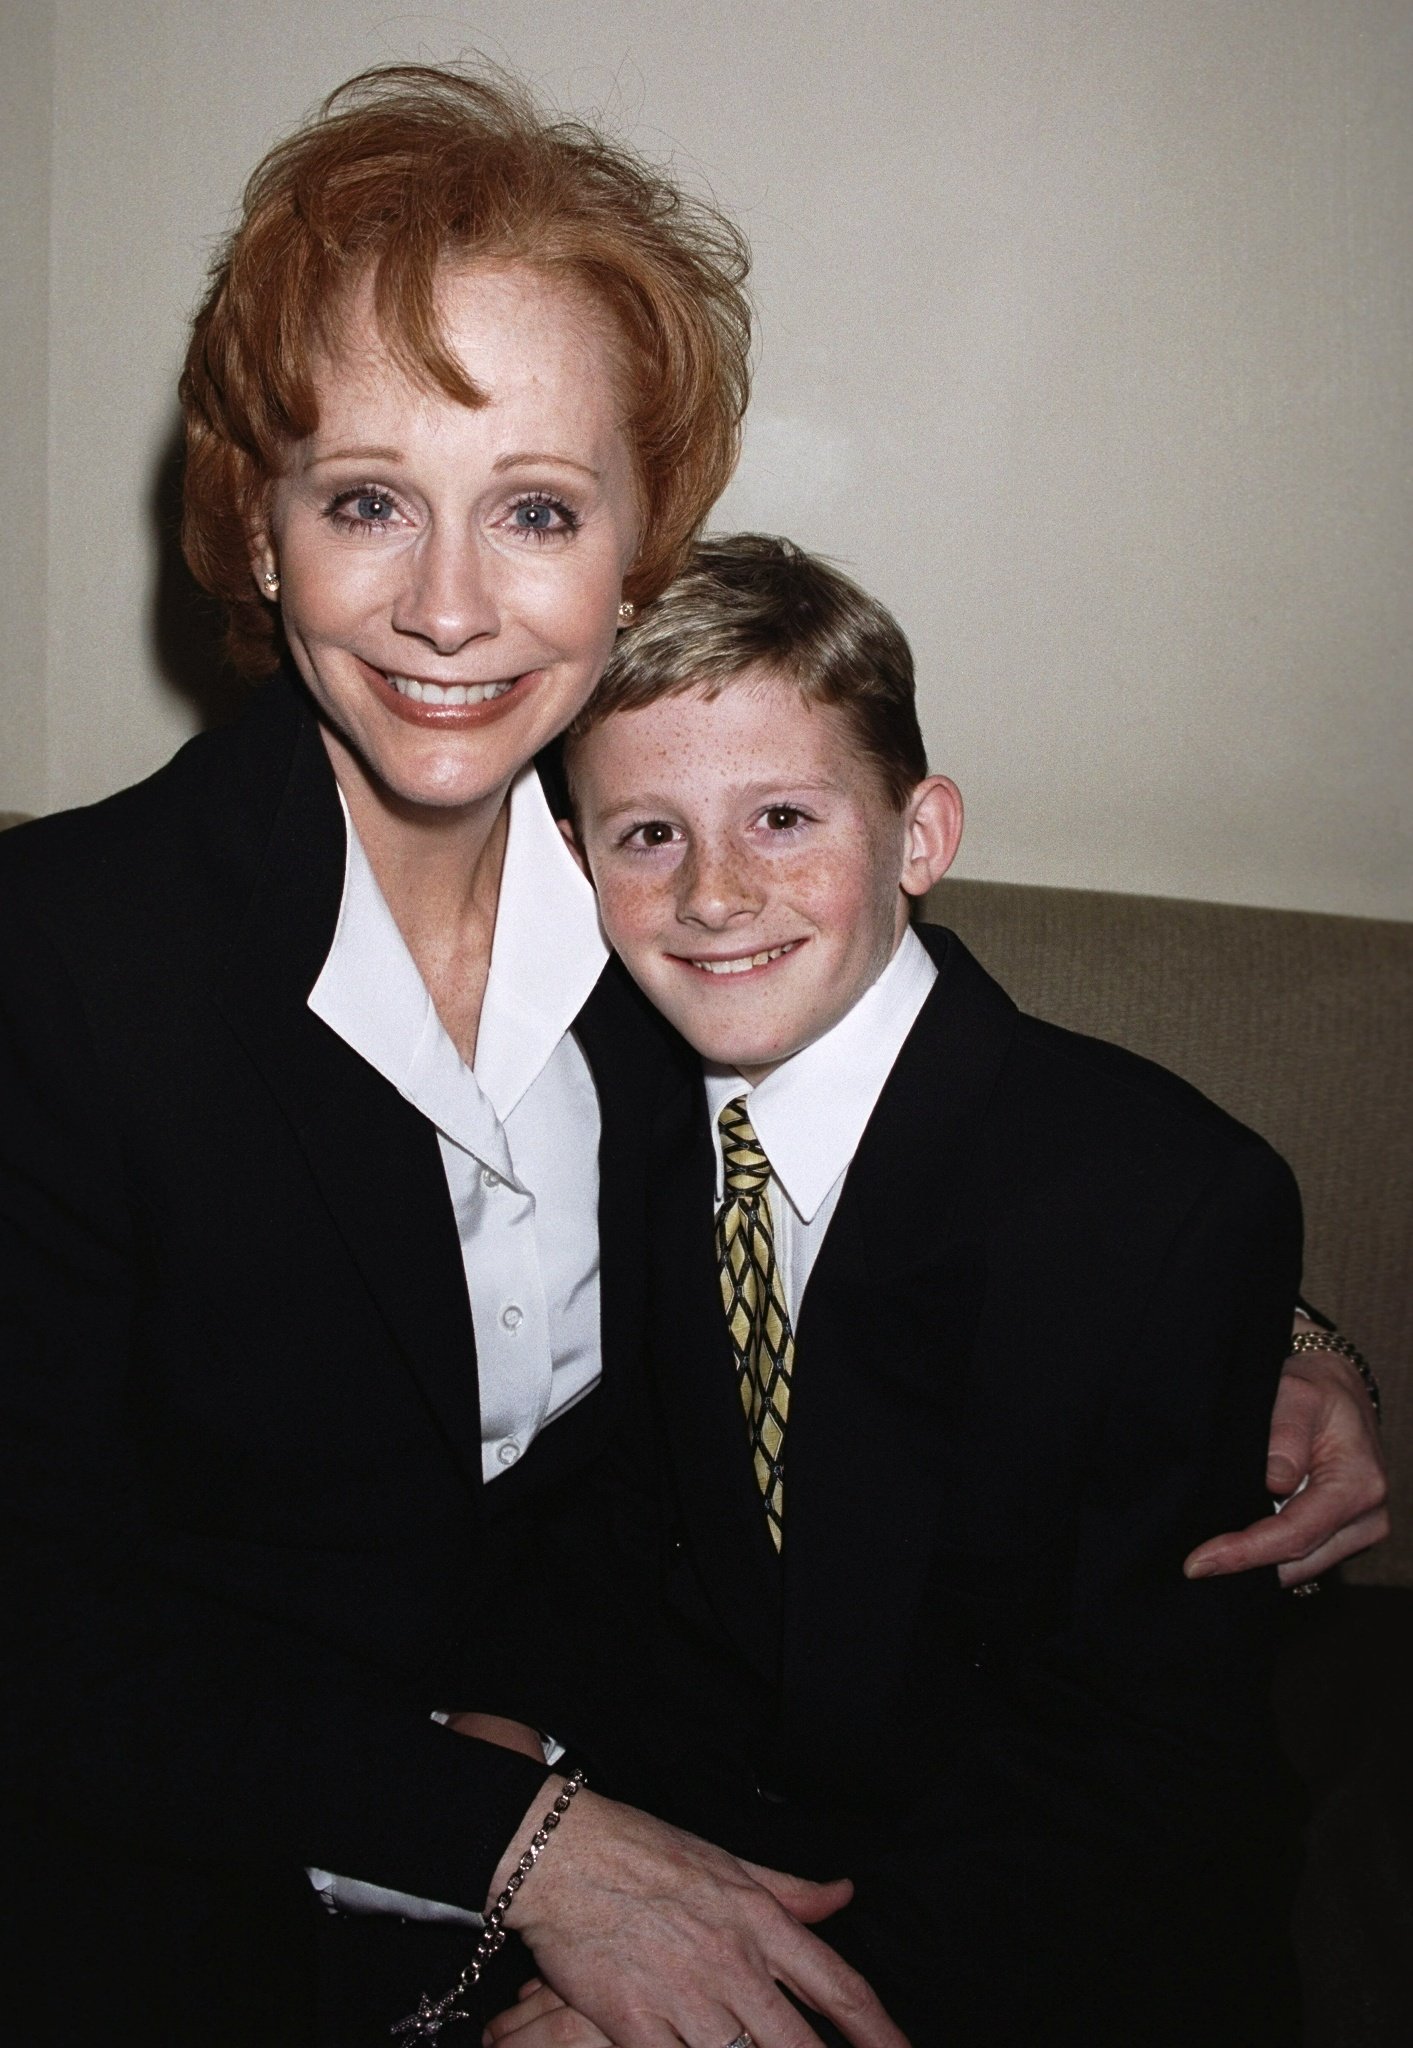 Reba McEntire and her son Shelby in New York circa 2000 | Photo: Getty Images